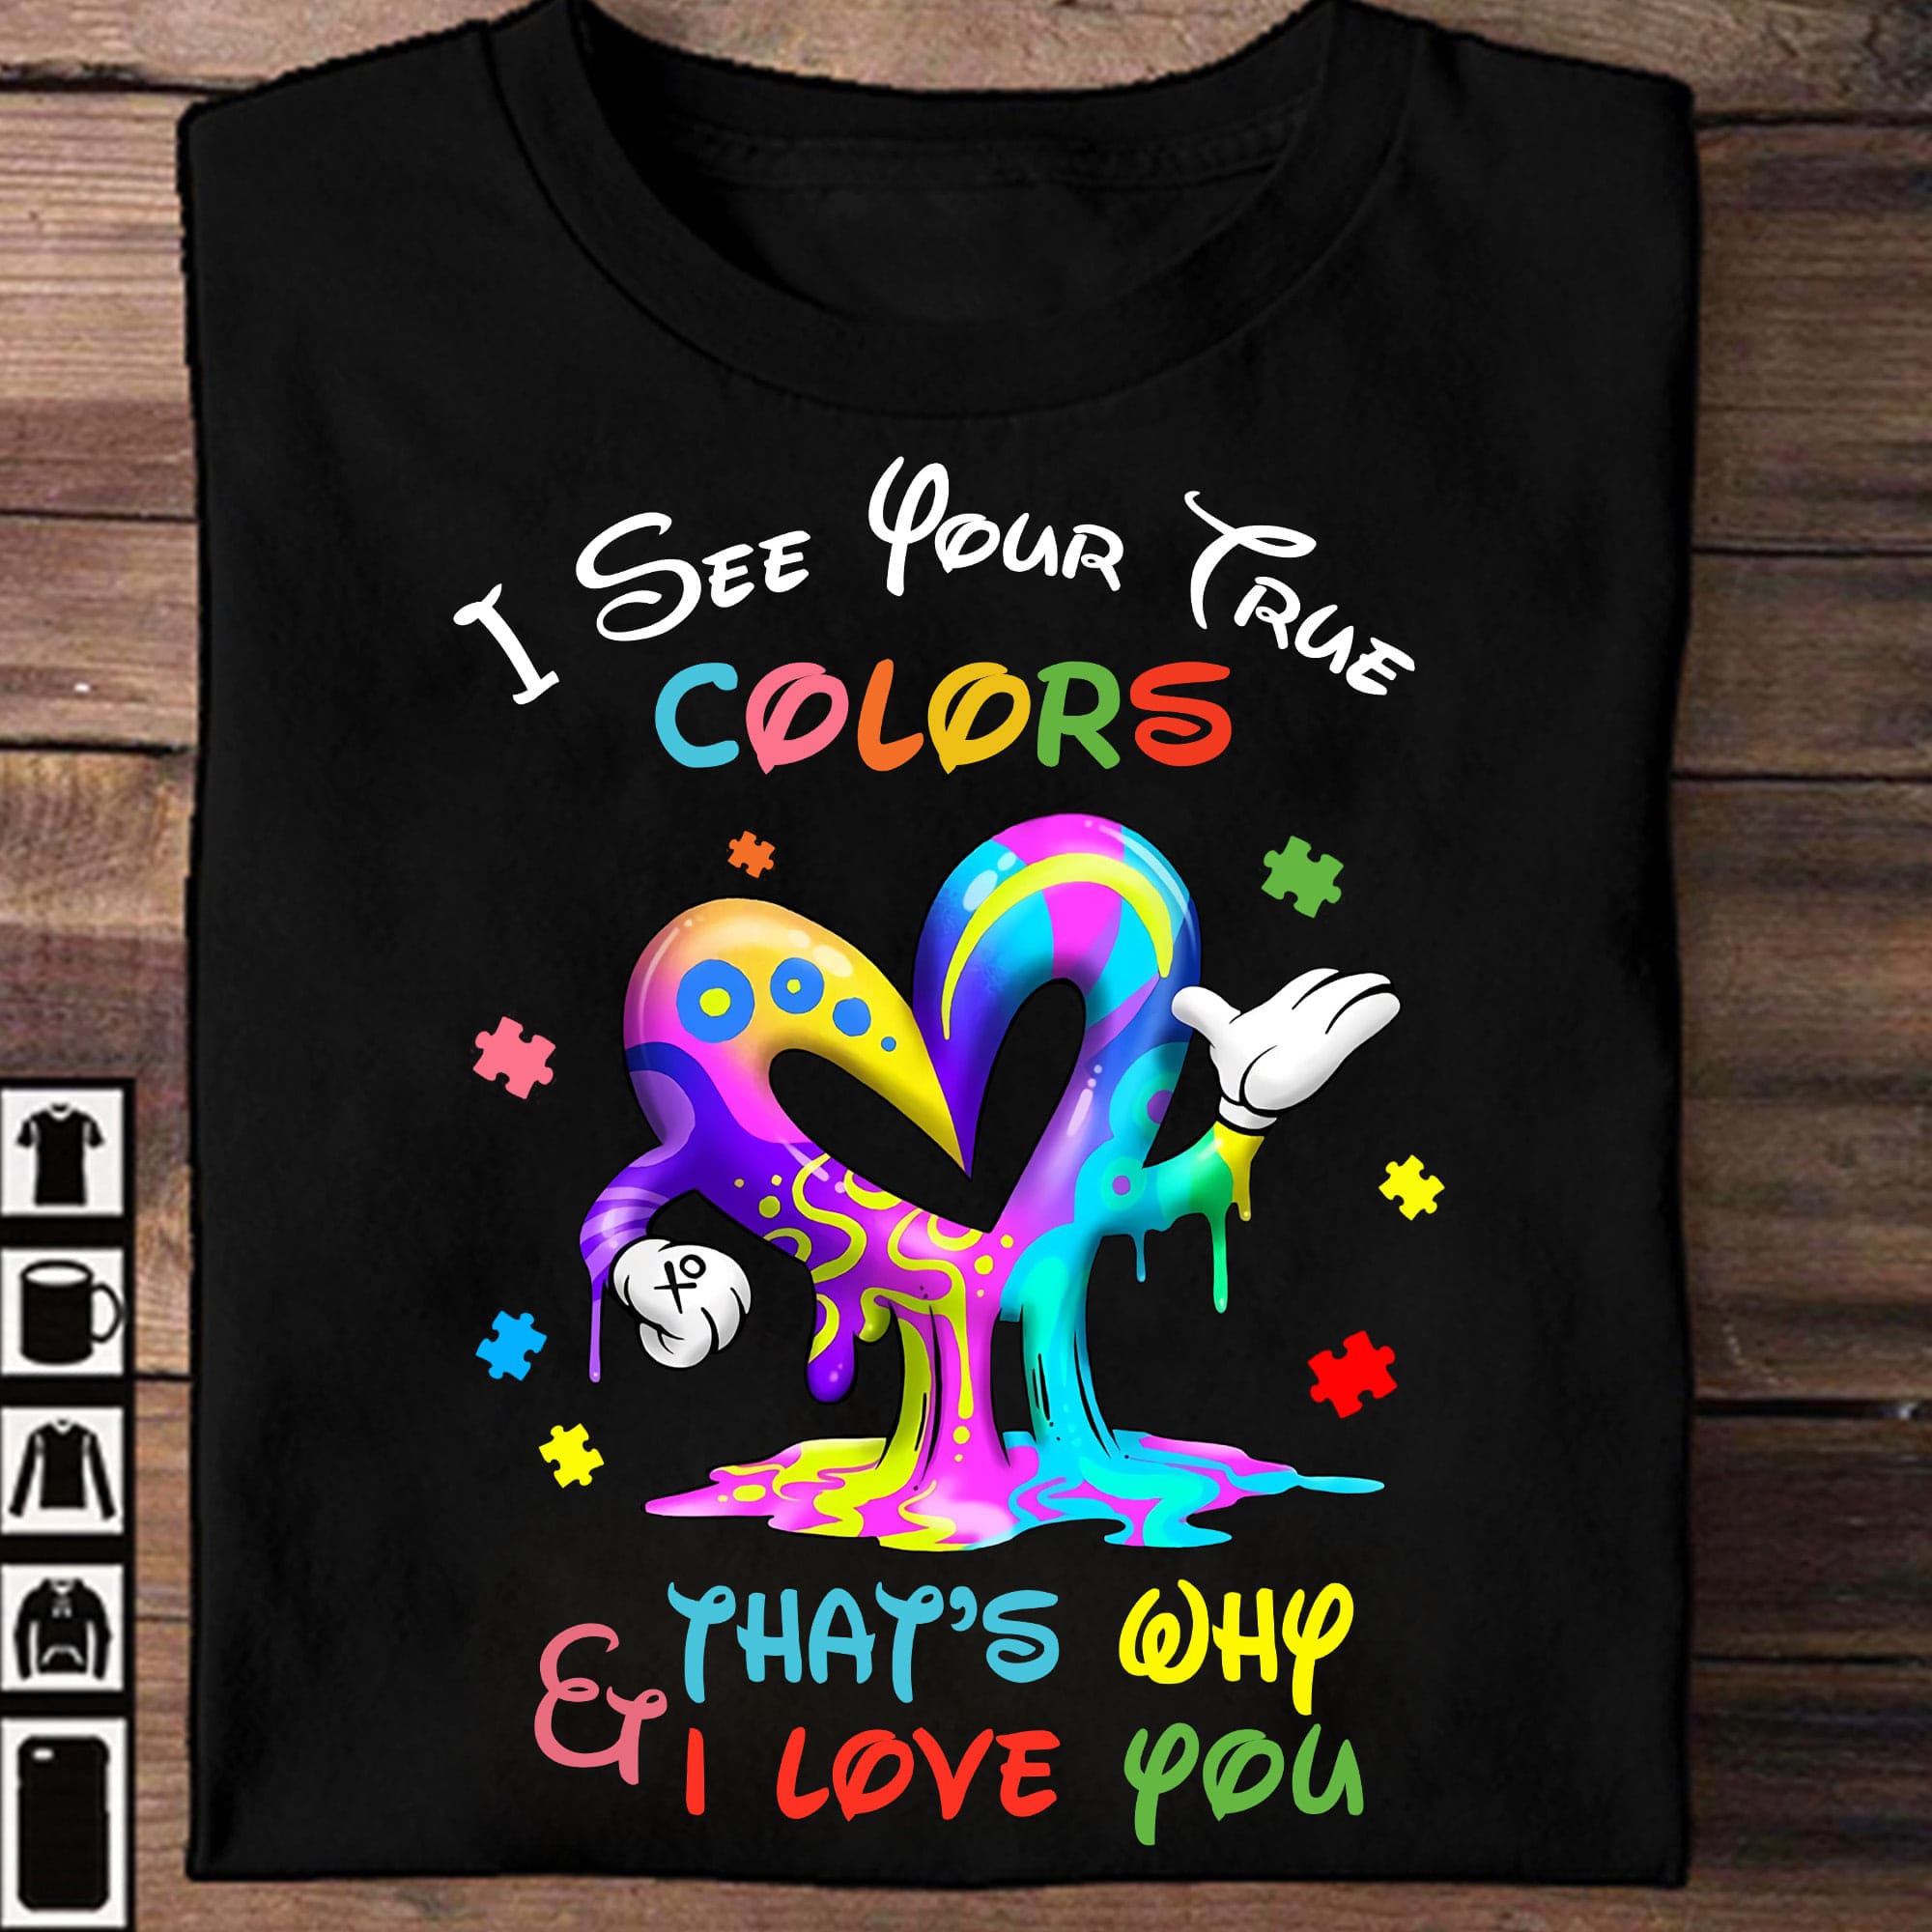 Autism Heart - I see your true colors that's why i love you